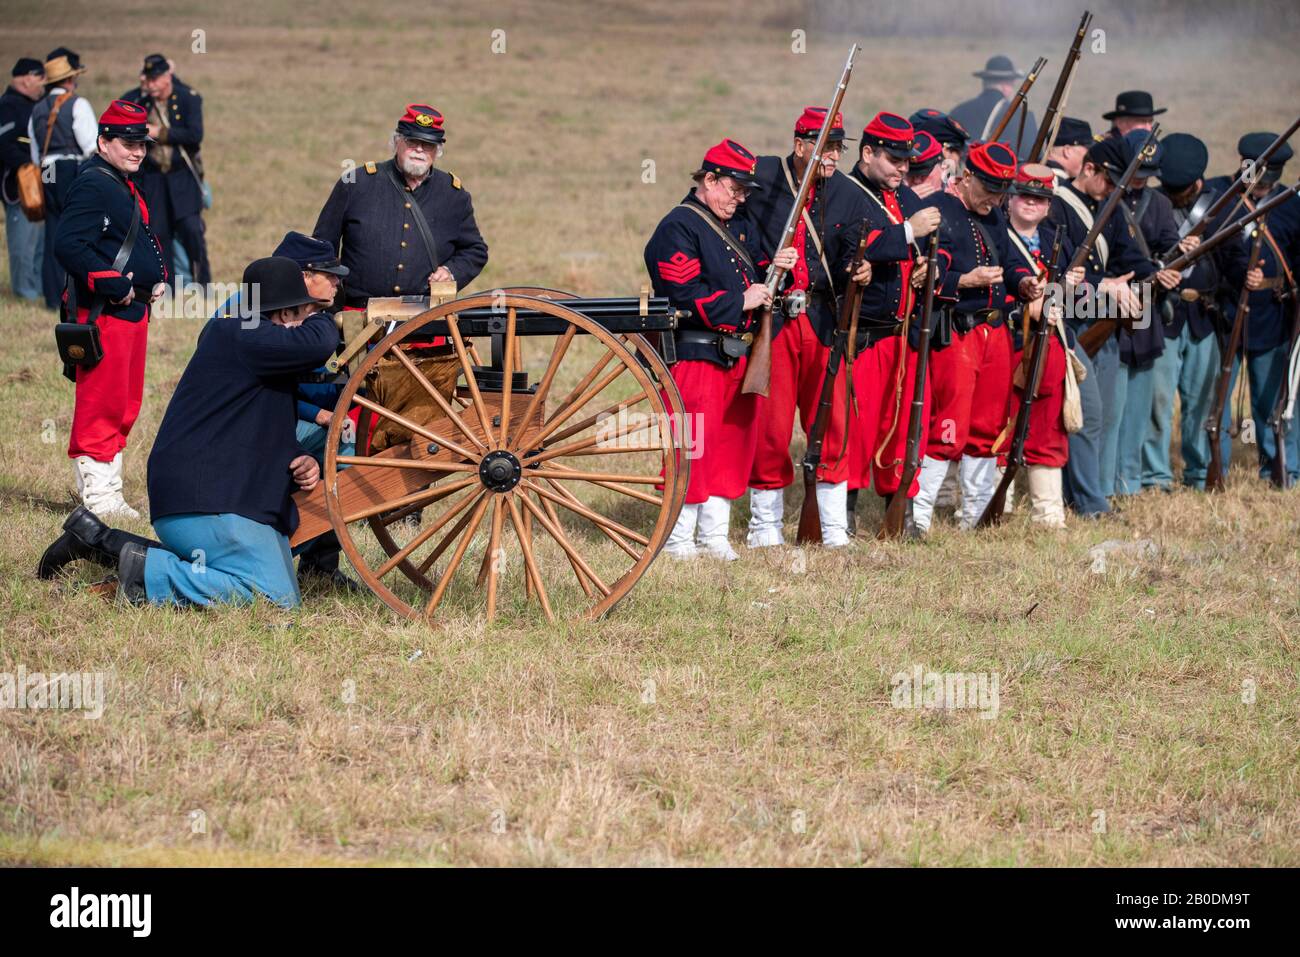 Brooksville, FL - January 19, 2020: Reenactors portraying Union troops at the time of the American Civil War prepare to fire a Gatling Gun. Stock Photo